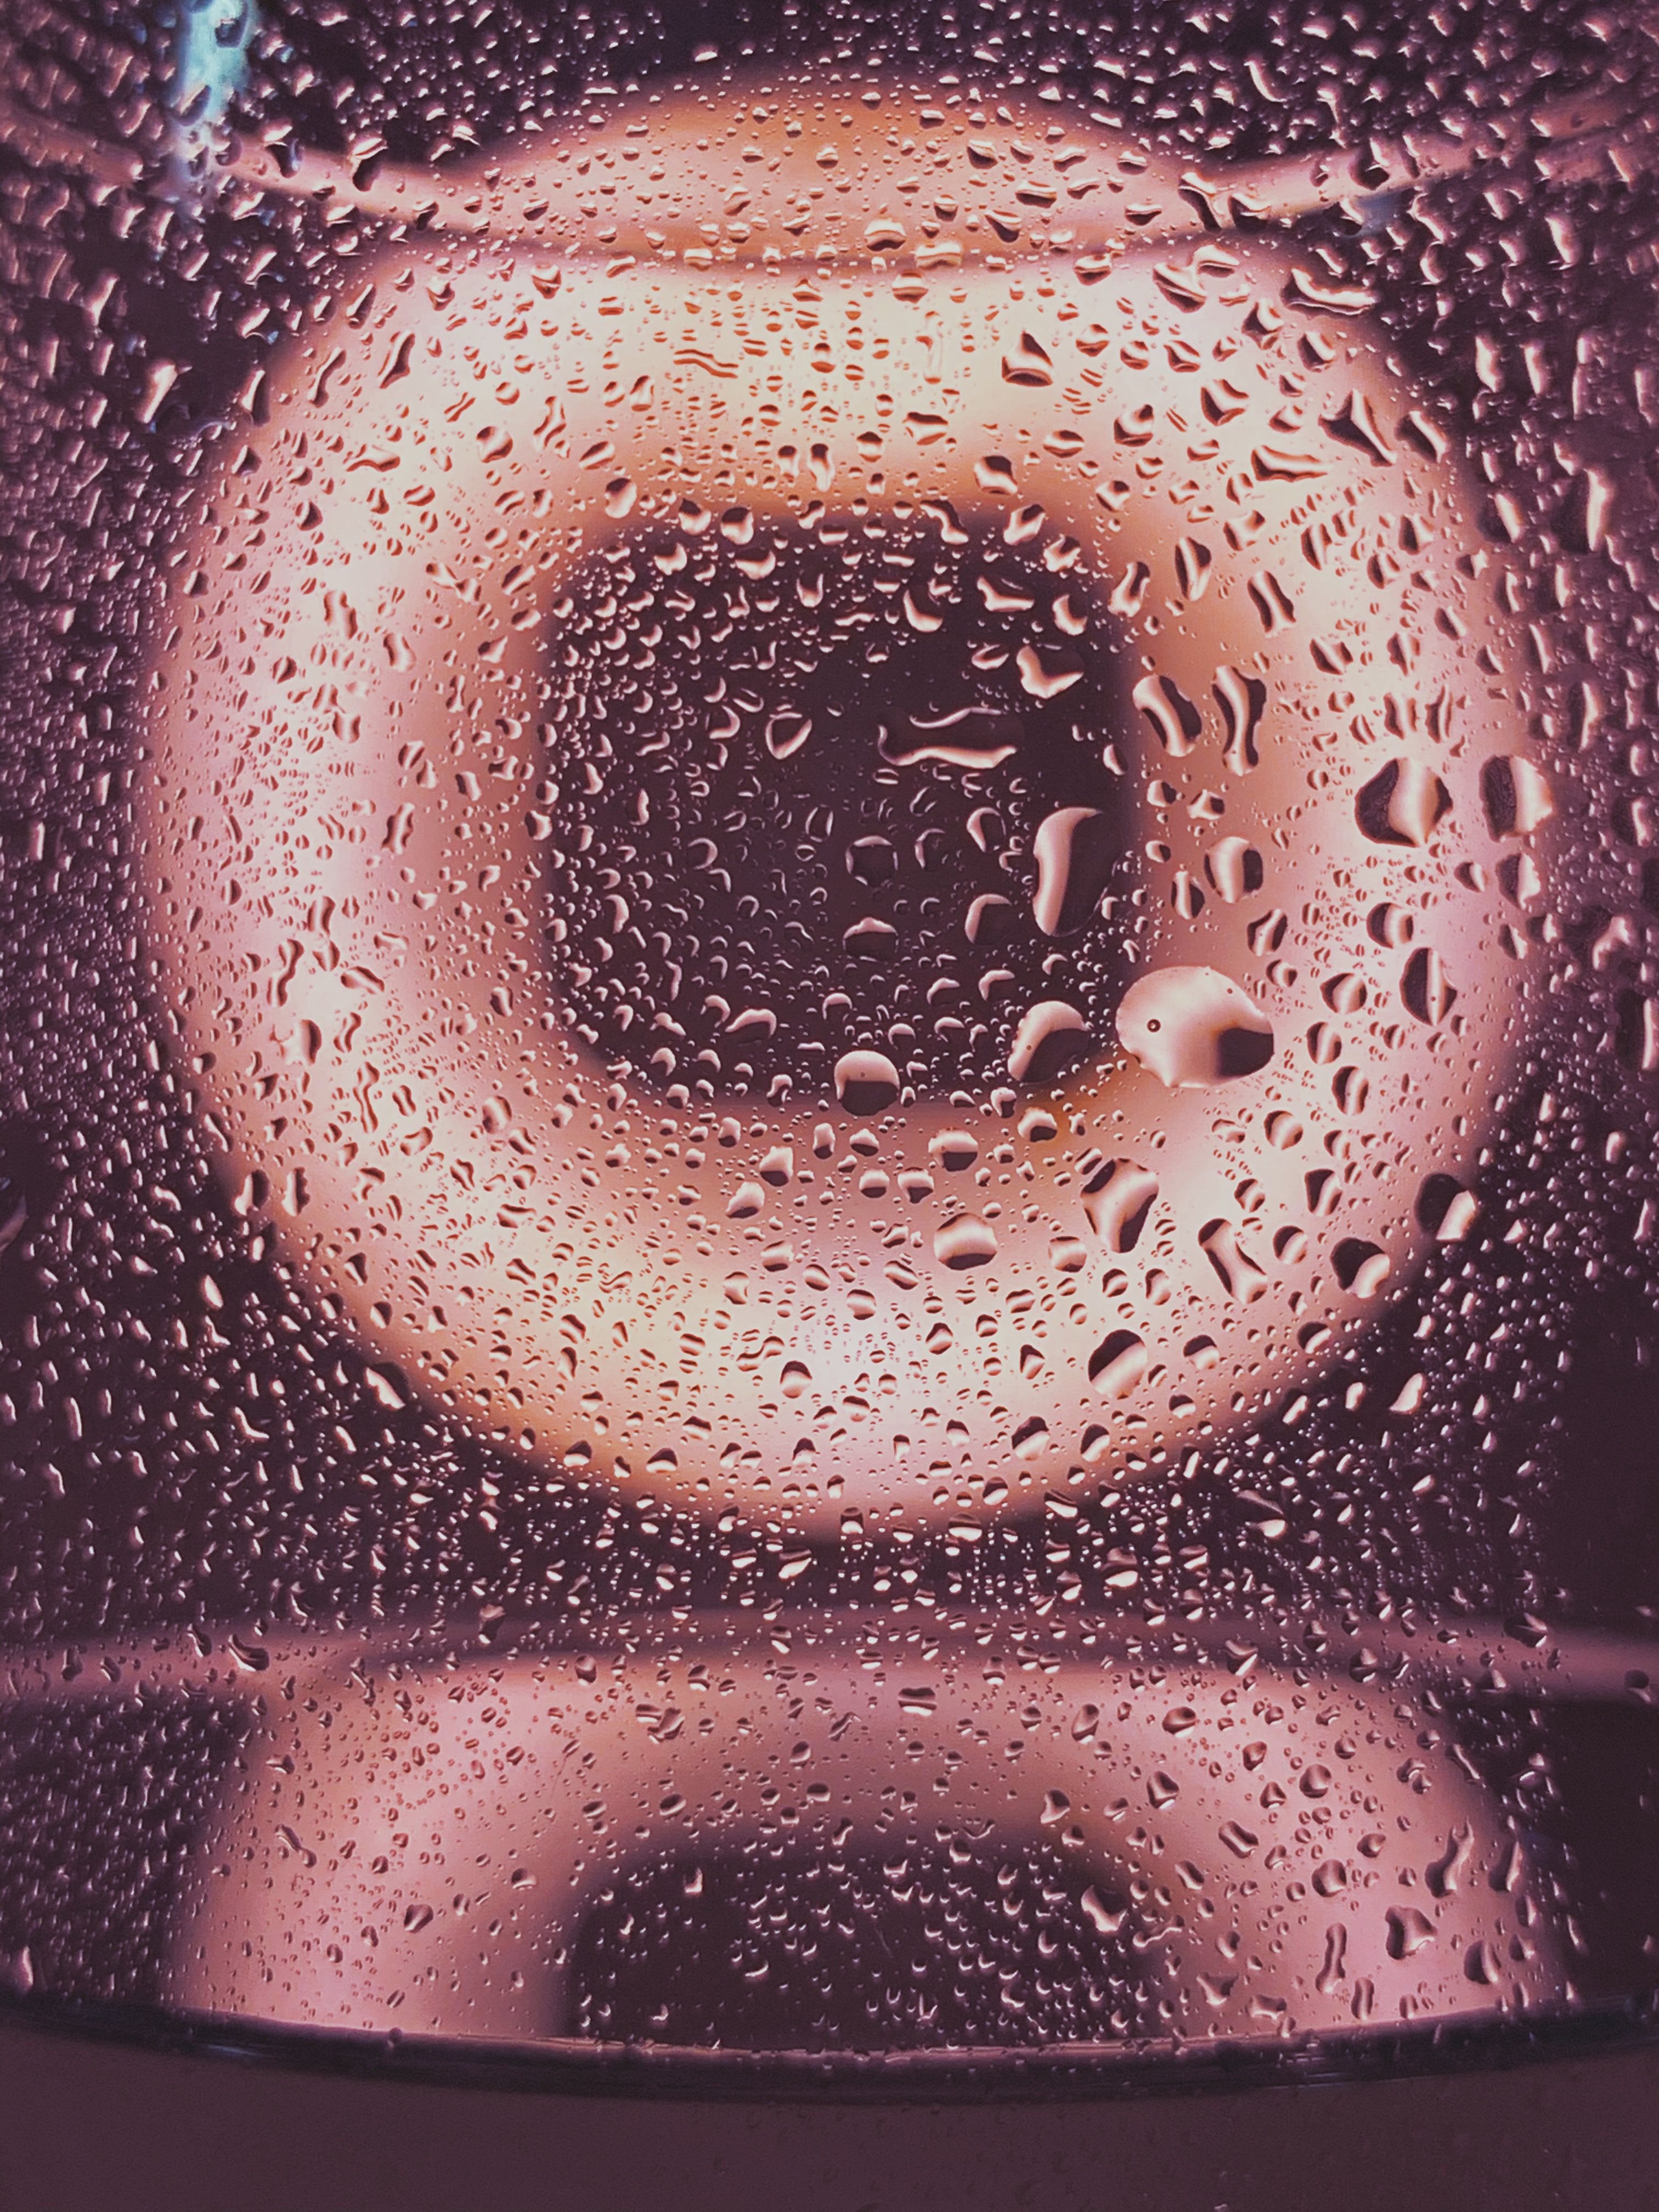 Water Drops on Brown Surface · Free